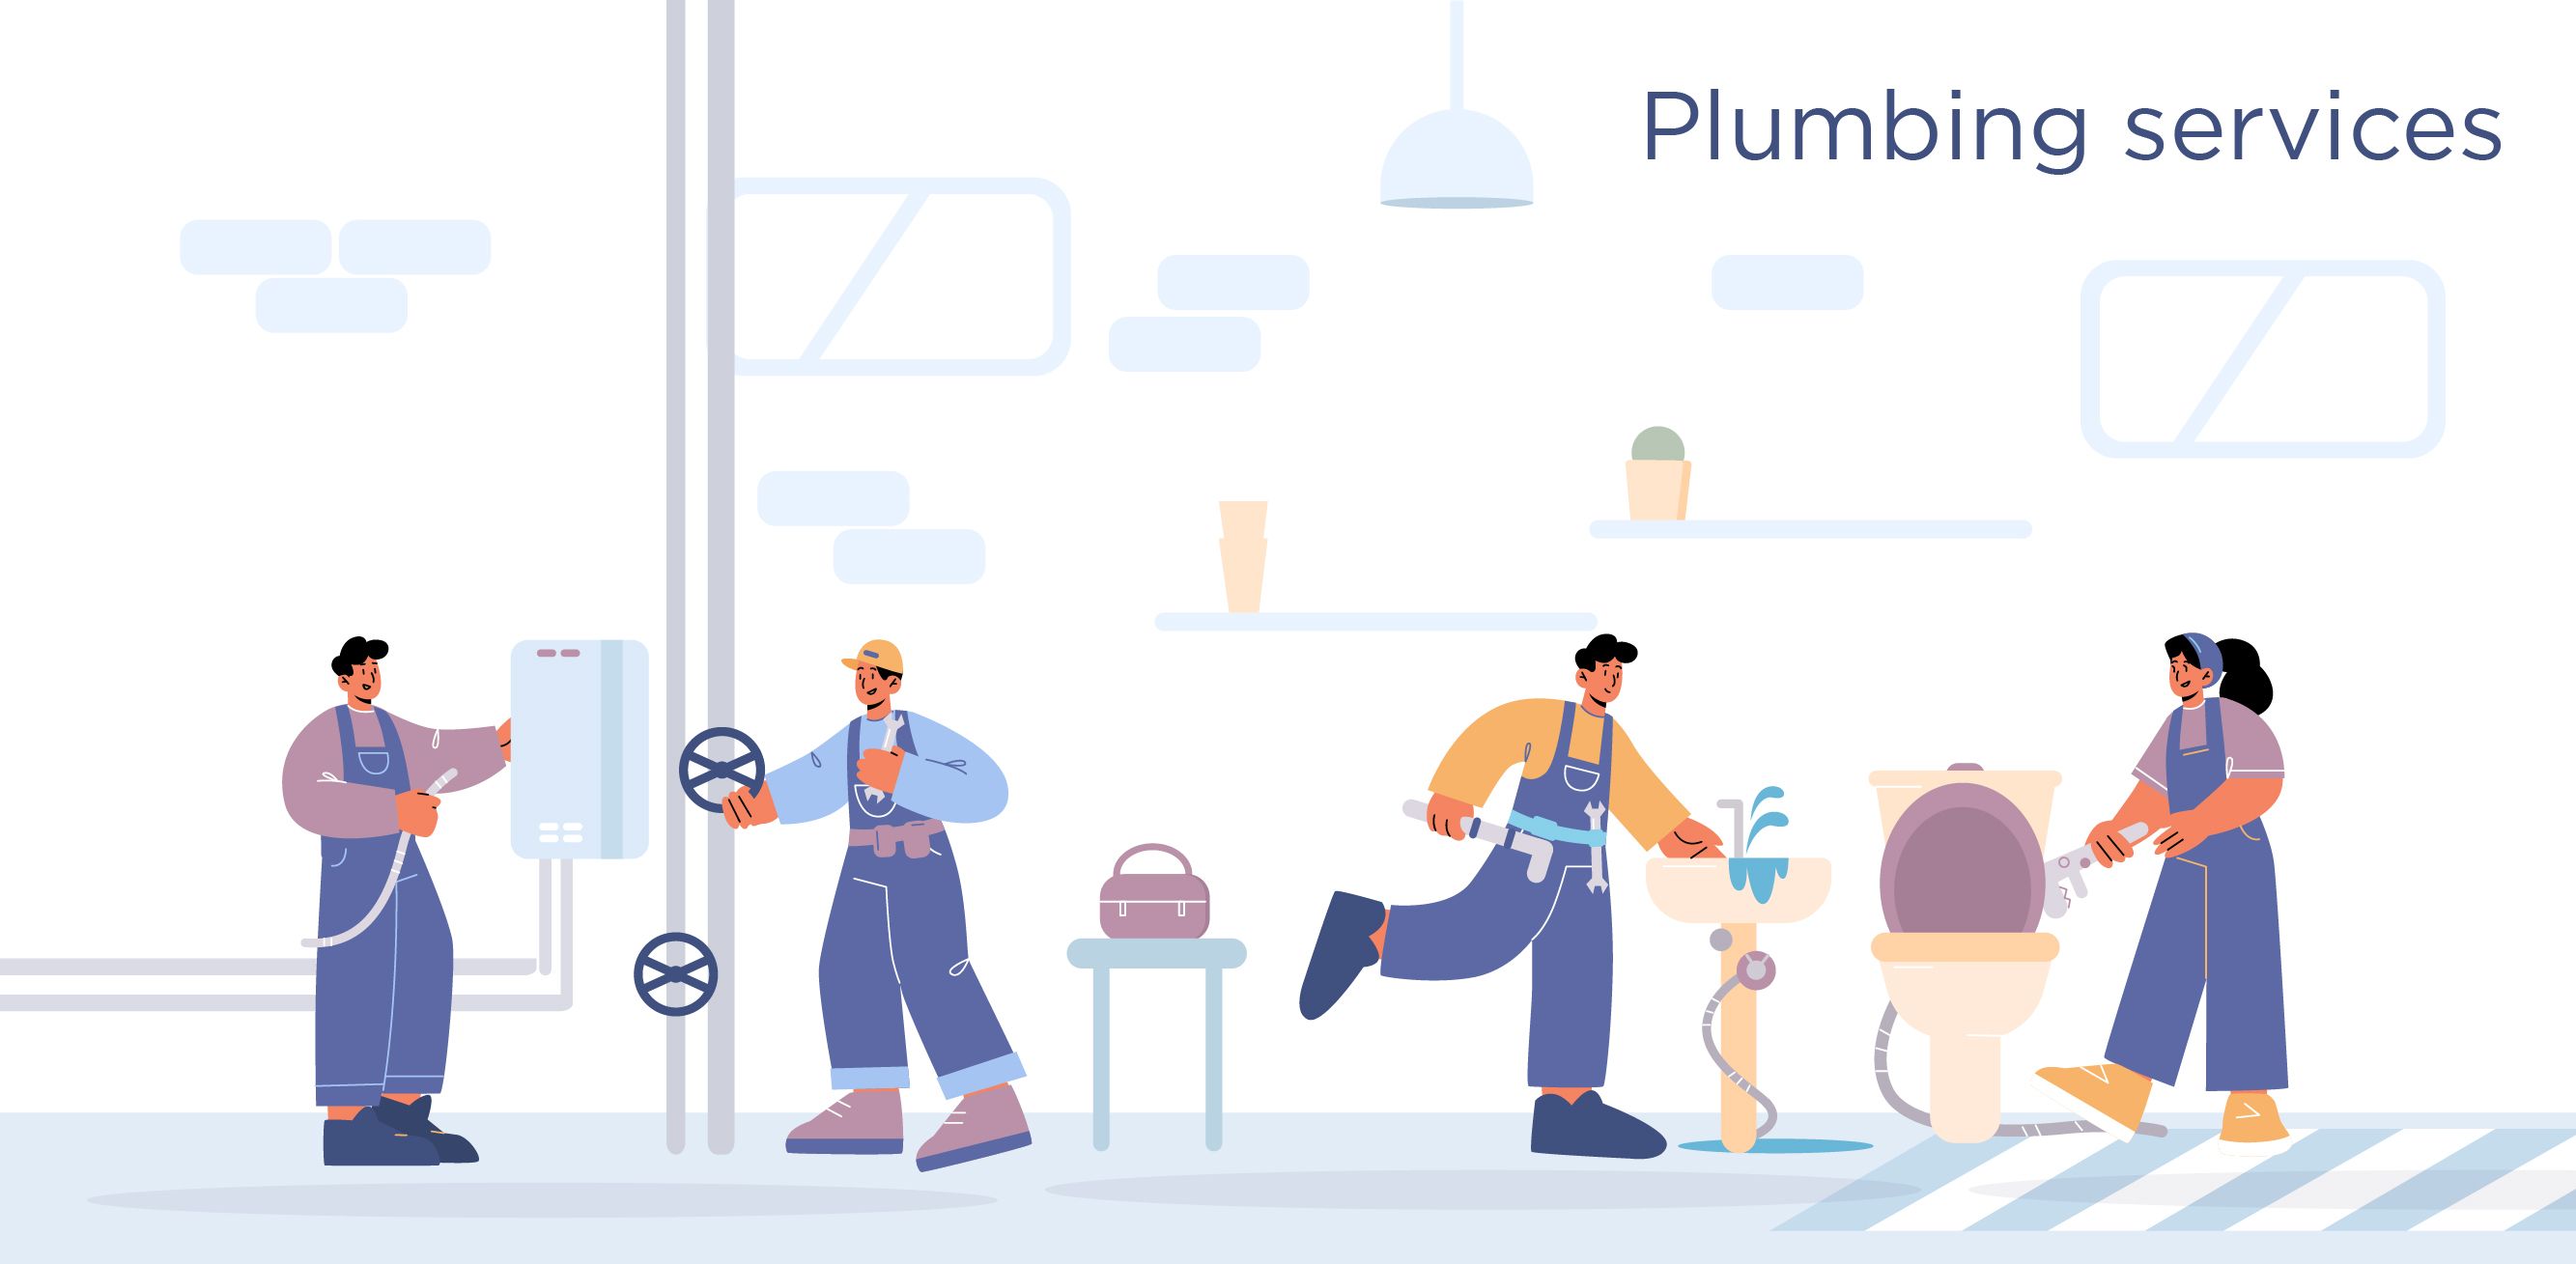 On-Demand Plumbing services